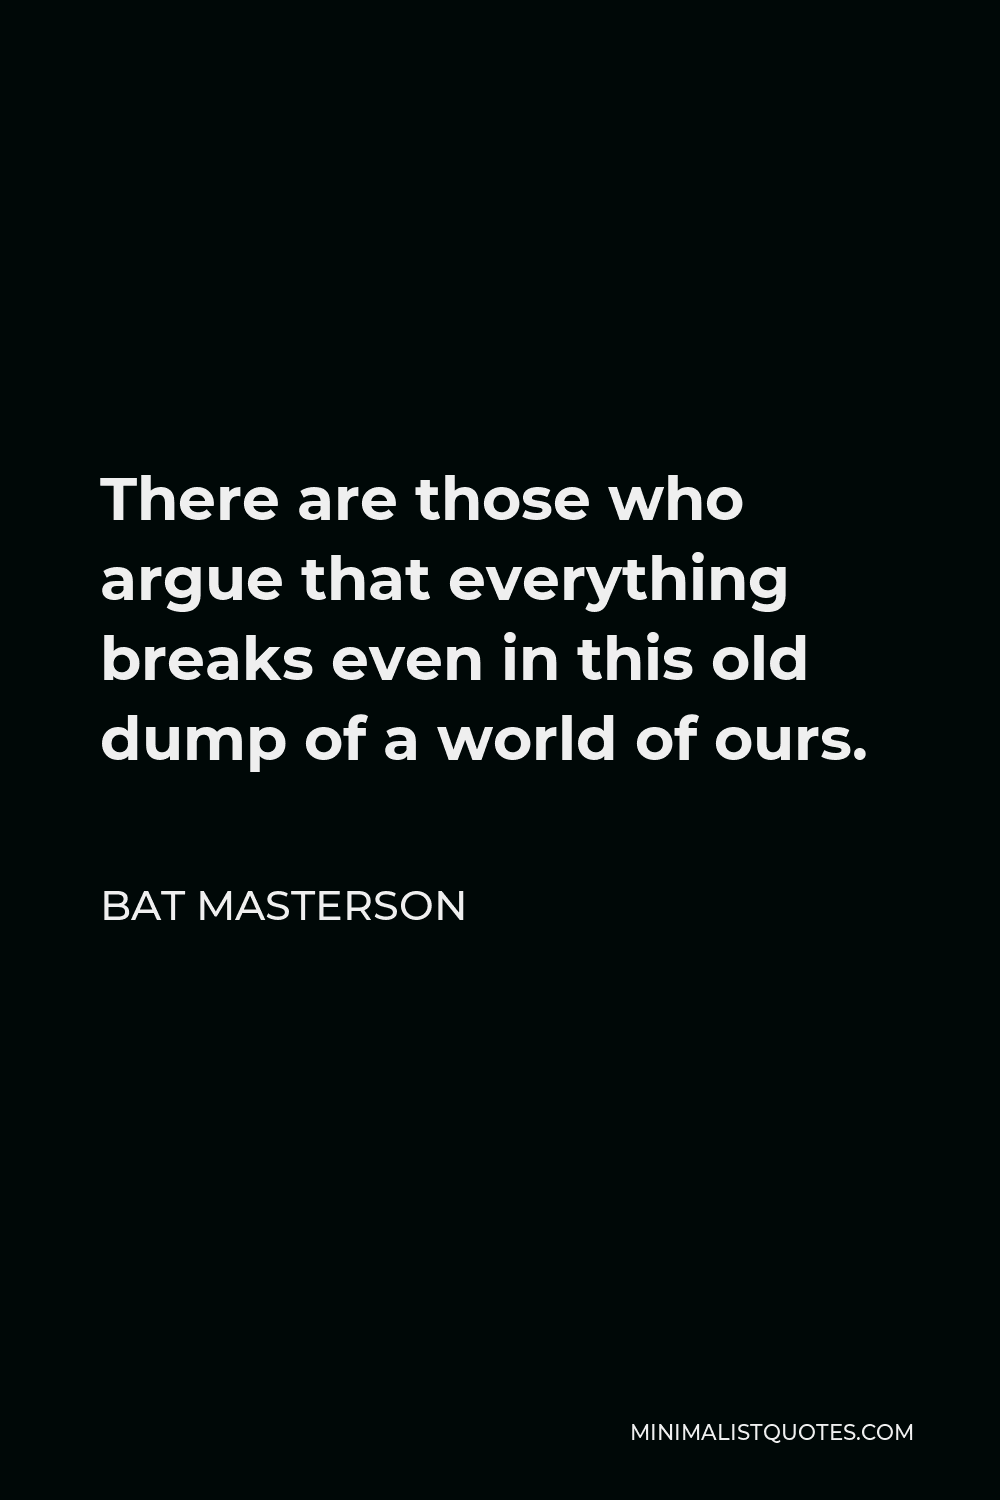 Bat Masterson Quote - There are those who argue that everything breaks even in this old dump of a world of ours.